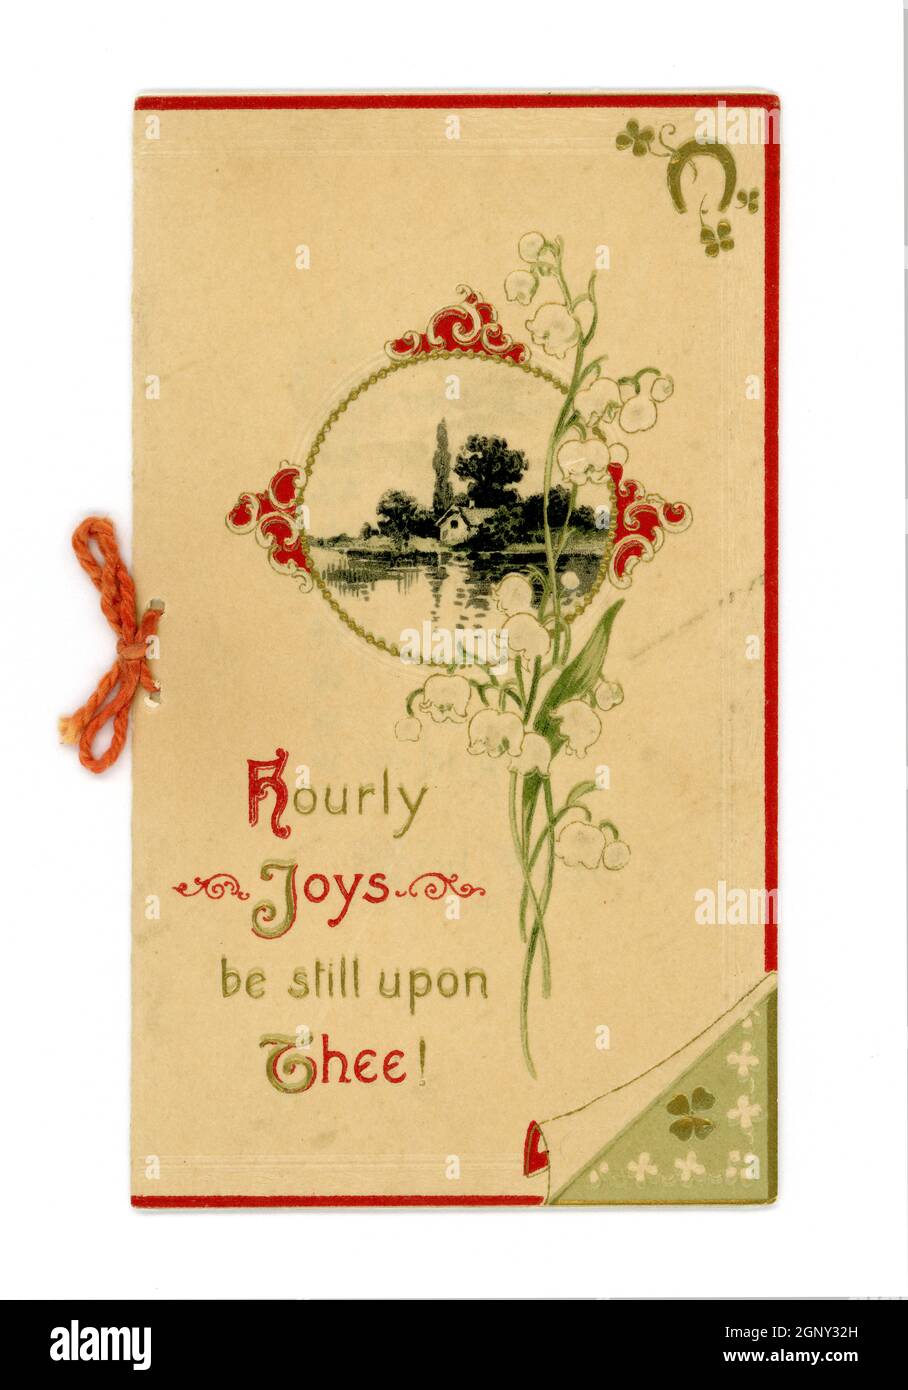 Original Edwardian New Year's greetings card. Published by Davidson Brothers, London, printed in Germany circa 1910 Stock Photo